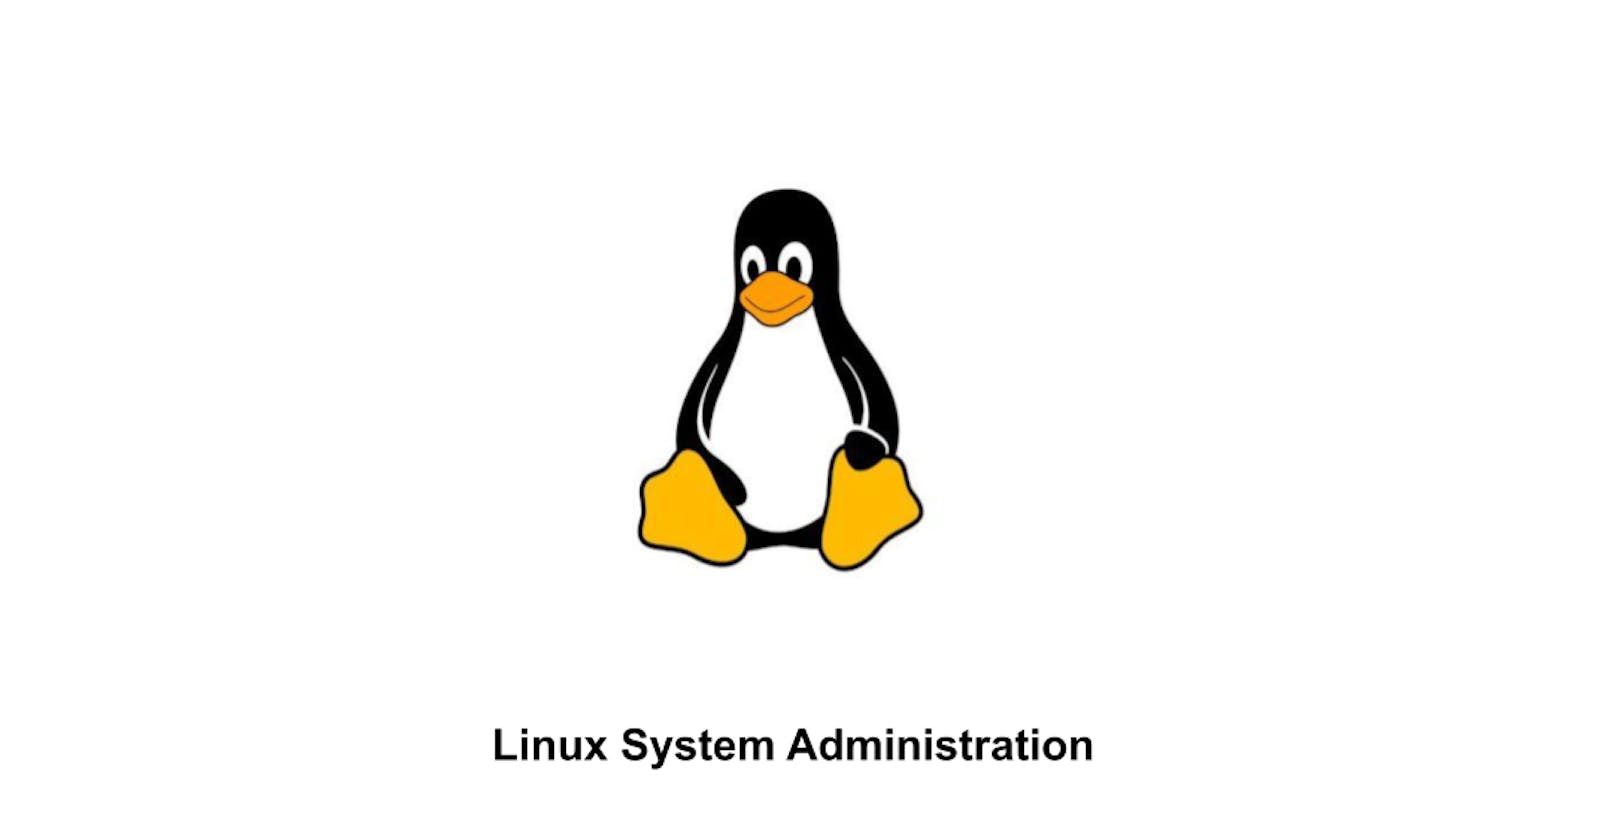 Brief Introduction For Getting Started As Linux System Administration